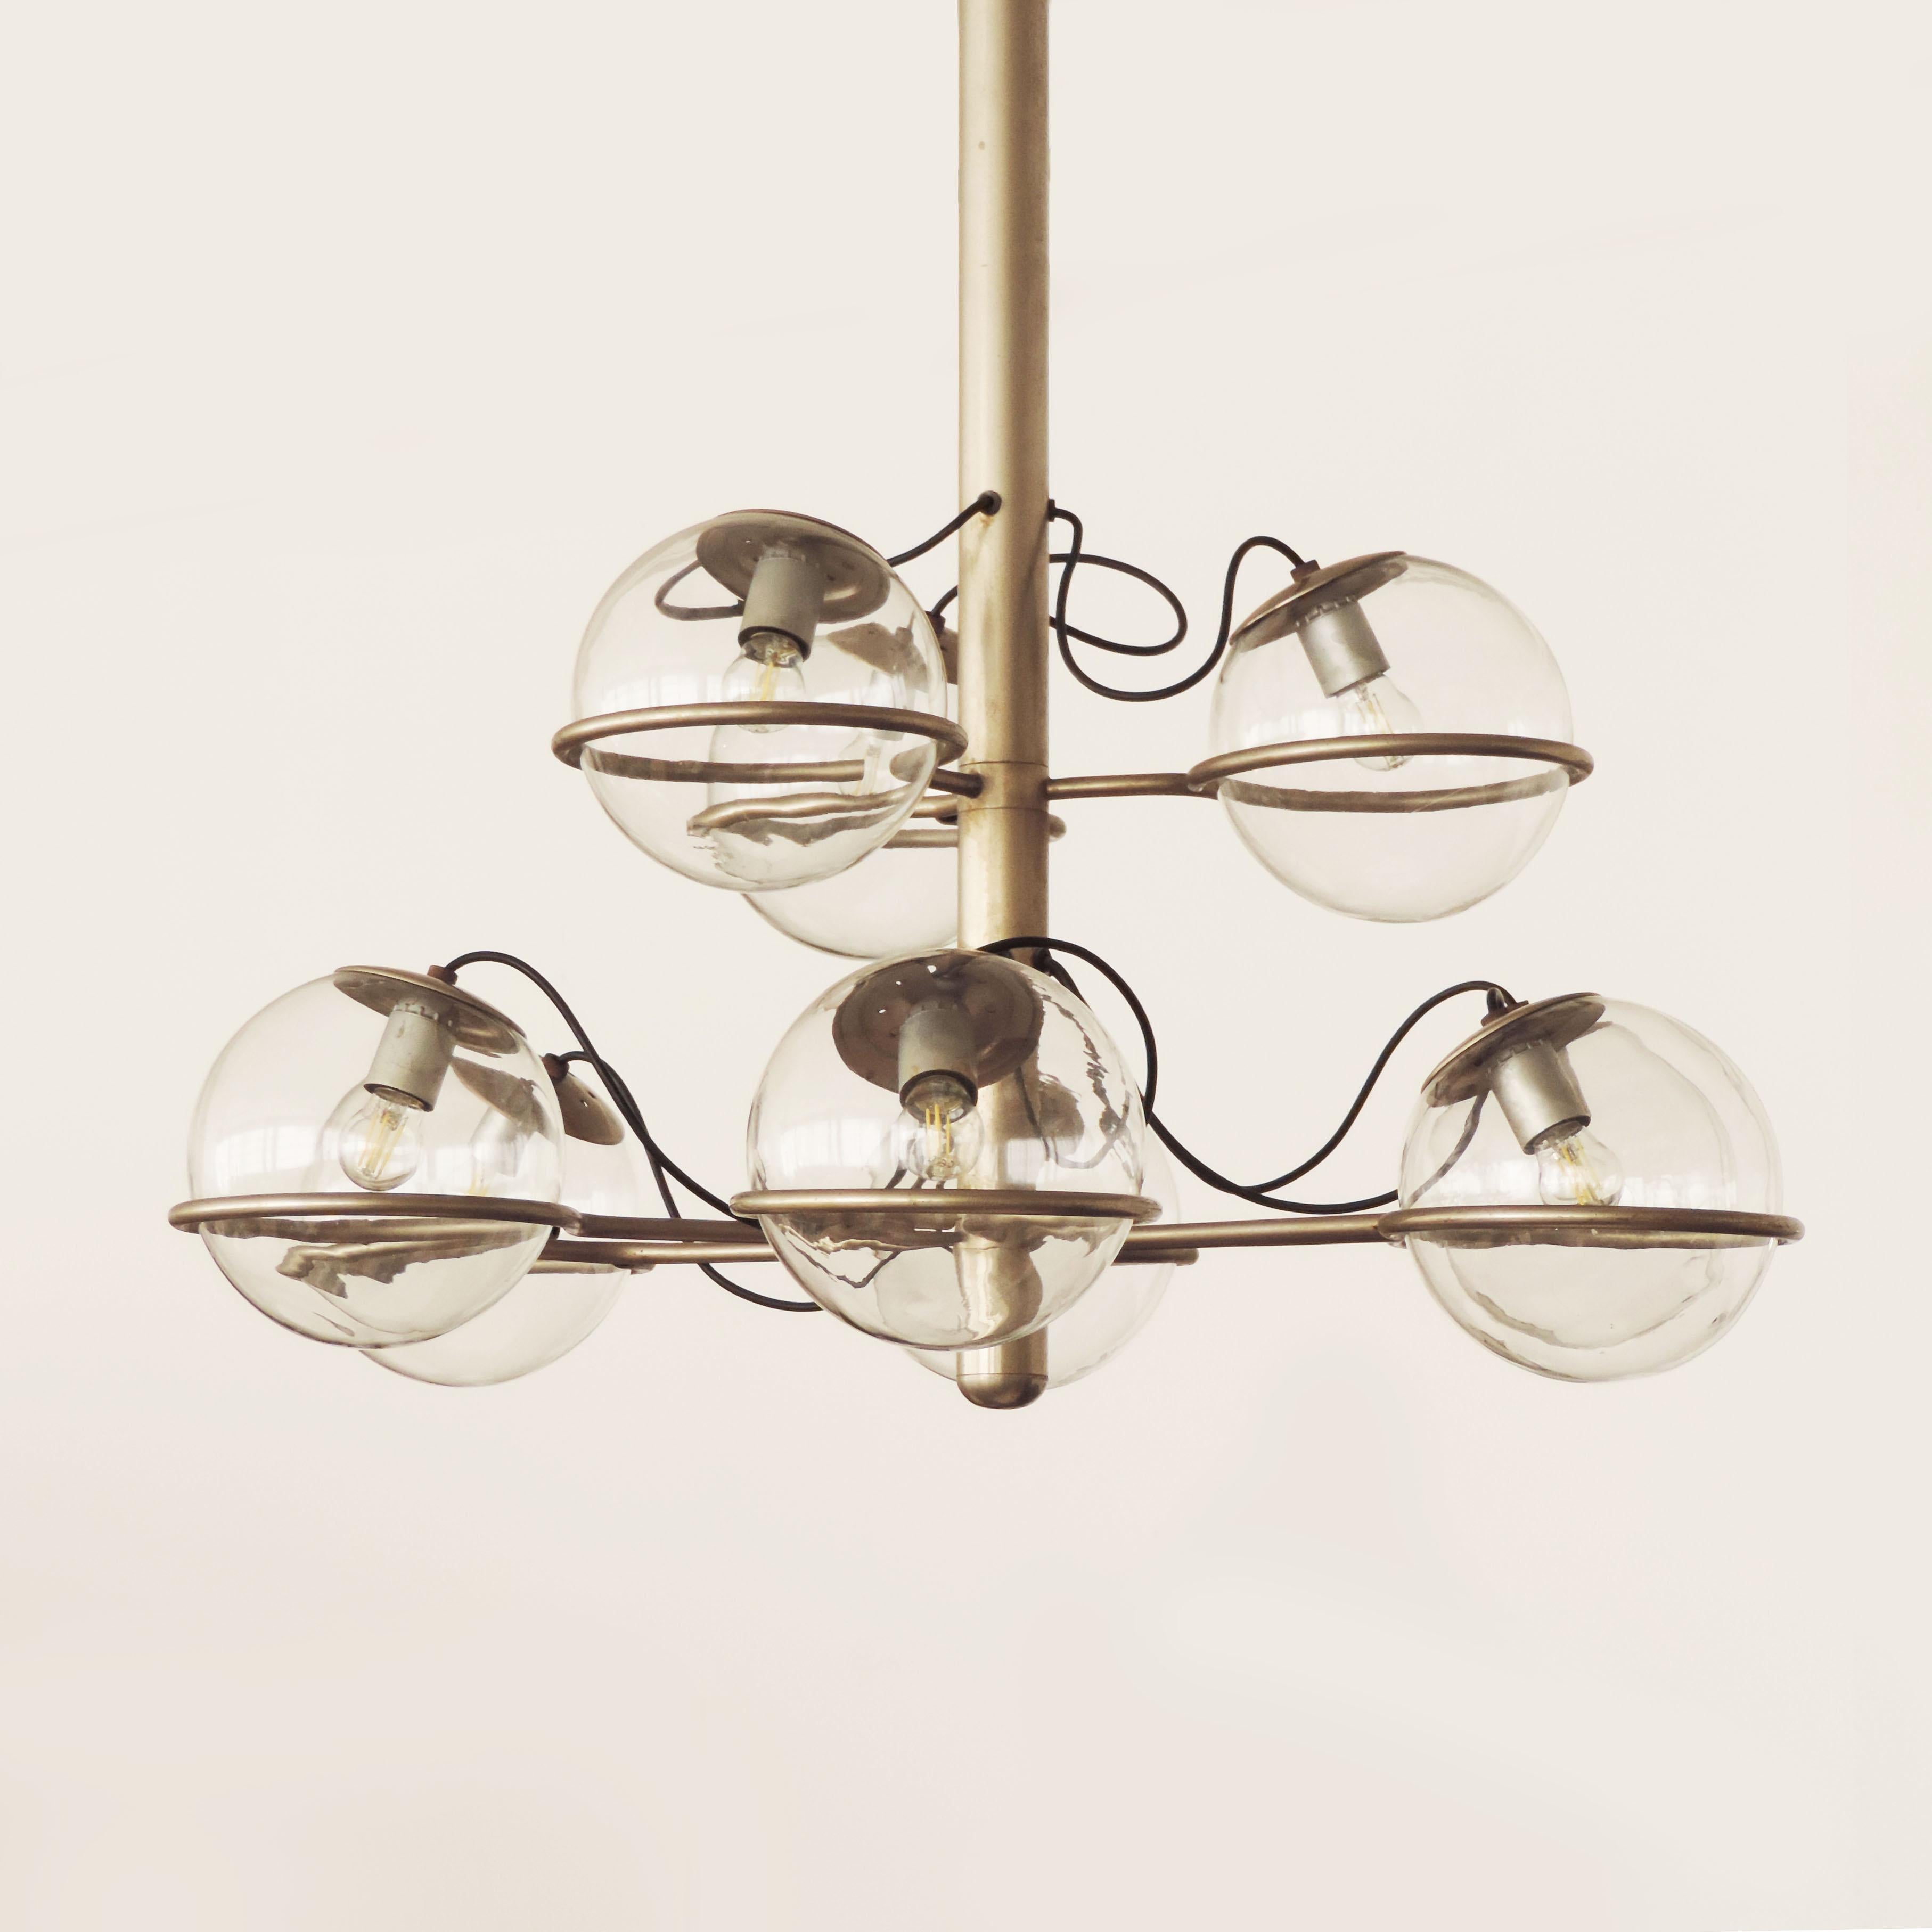 Monumental ceiling lamp attributed to Gino Sarfatti, Italy, 1960s
In nickel-plated brass with nine-light.